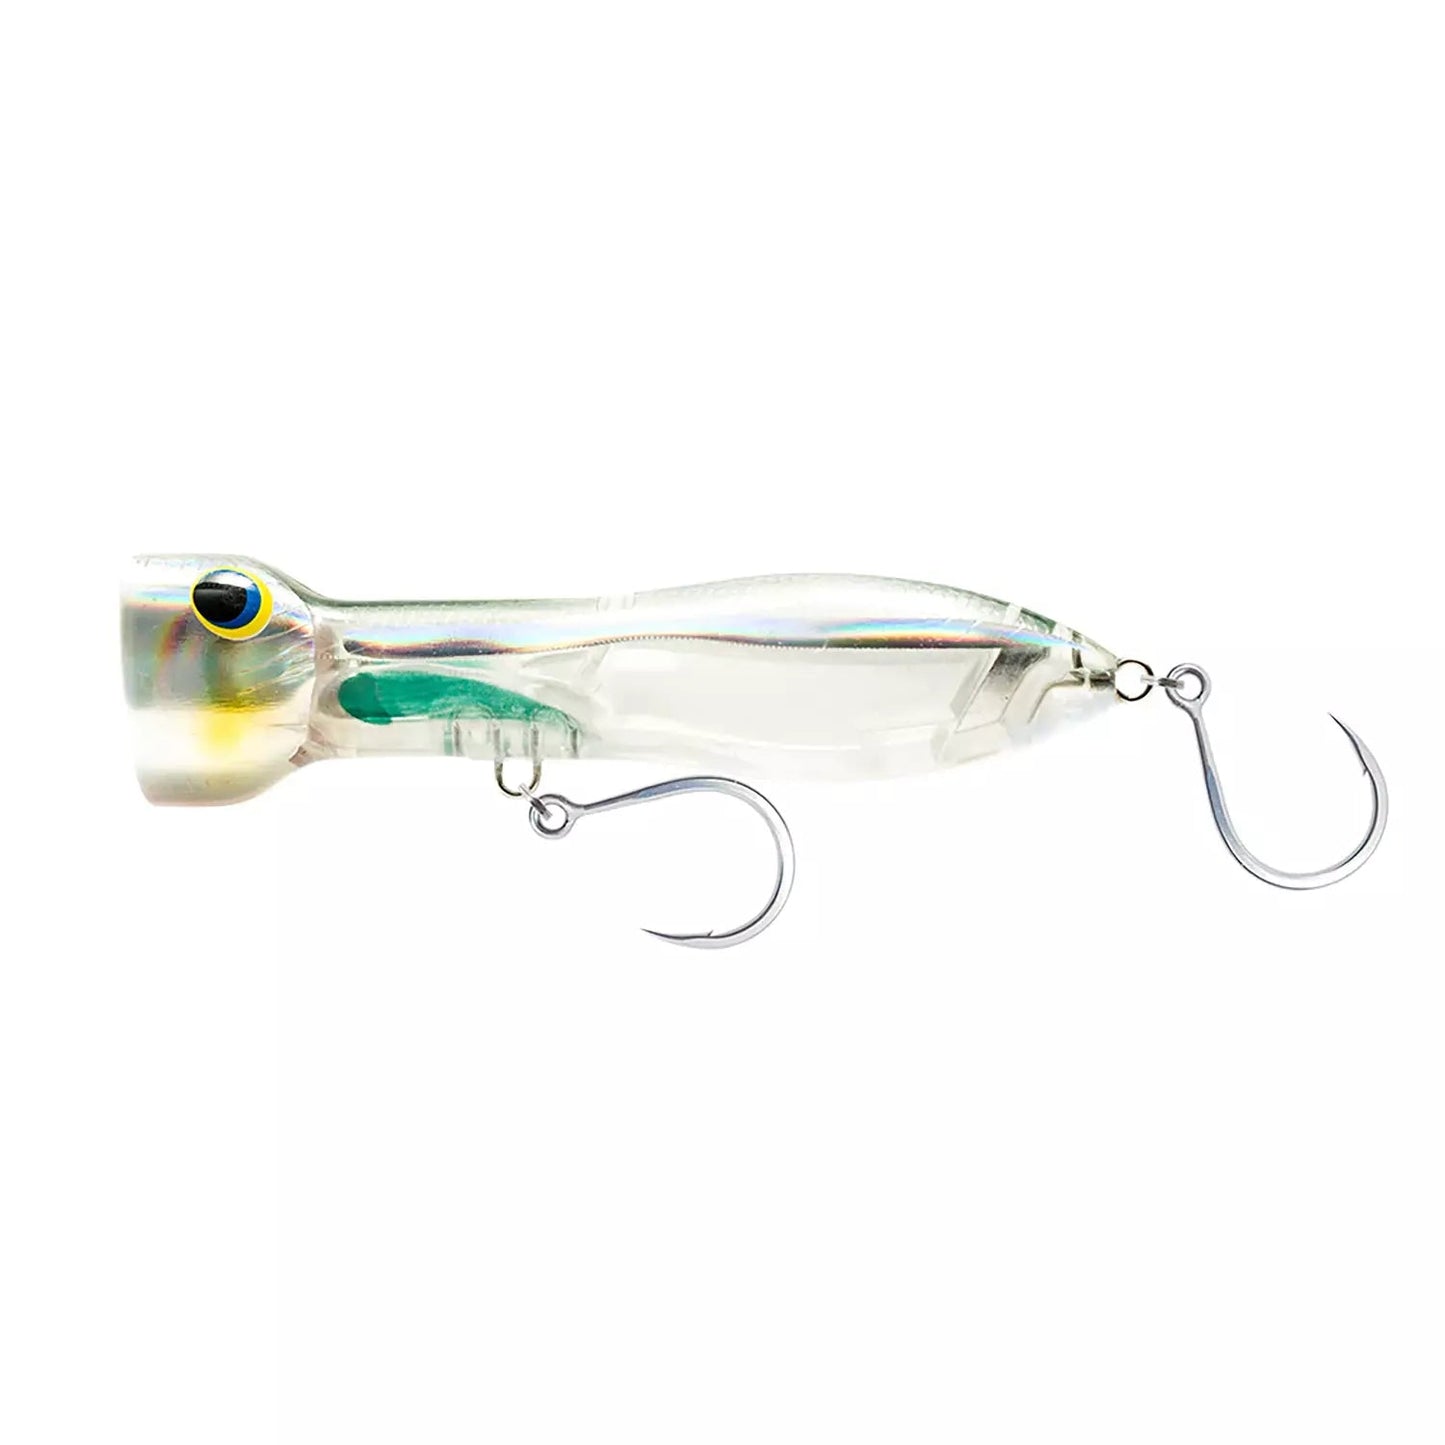 Nomad Design Chug Norris Popper-Lure - Poppers, Stickbaits & Pencils-Nomad-120mm-Holo Ghost Shad-Fishing Station